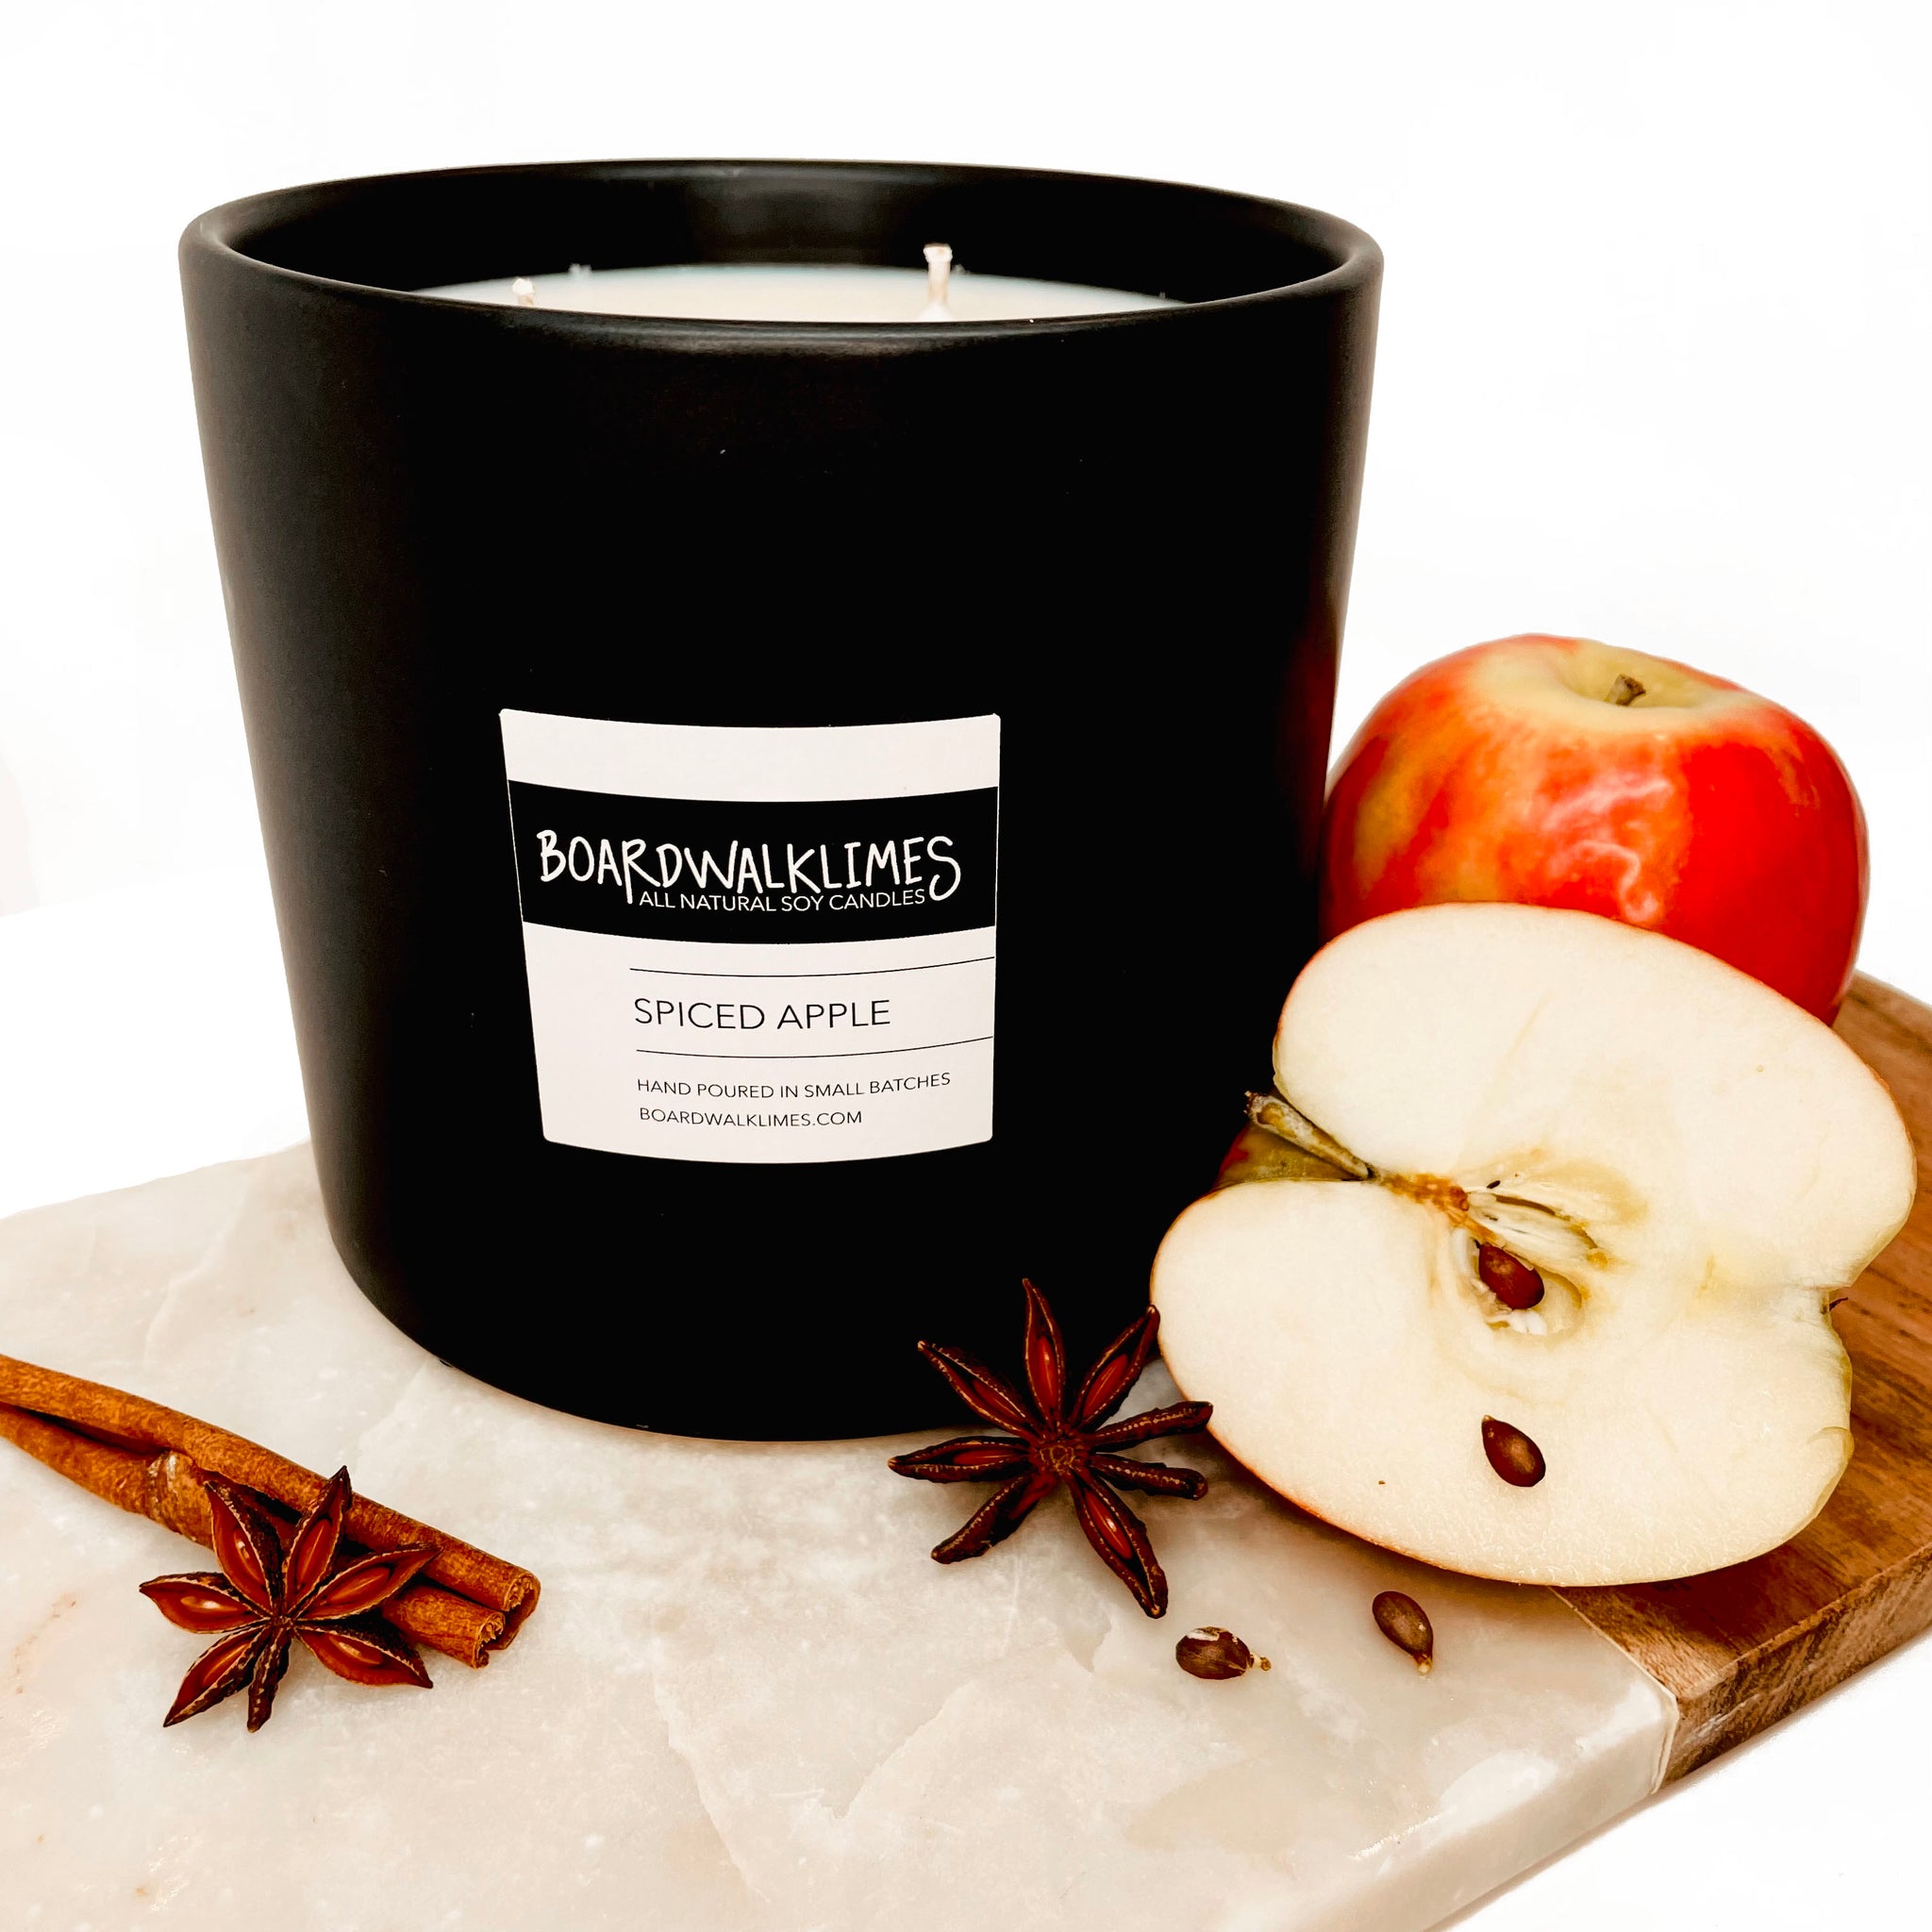 Luxury large fall scented soy candle with 3 wicks in a handmade black ceramic vase with apples and spiced and cinnamon